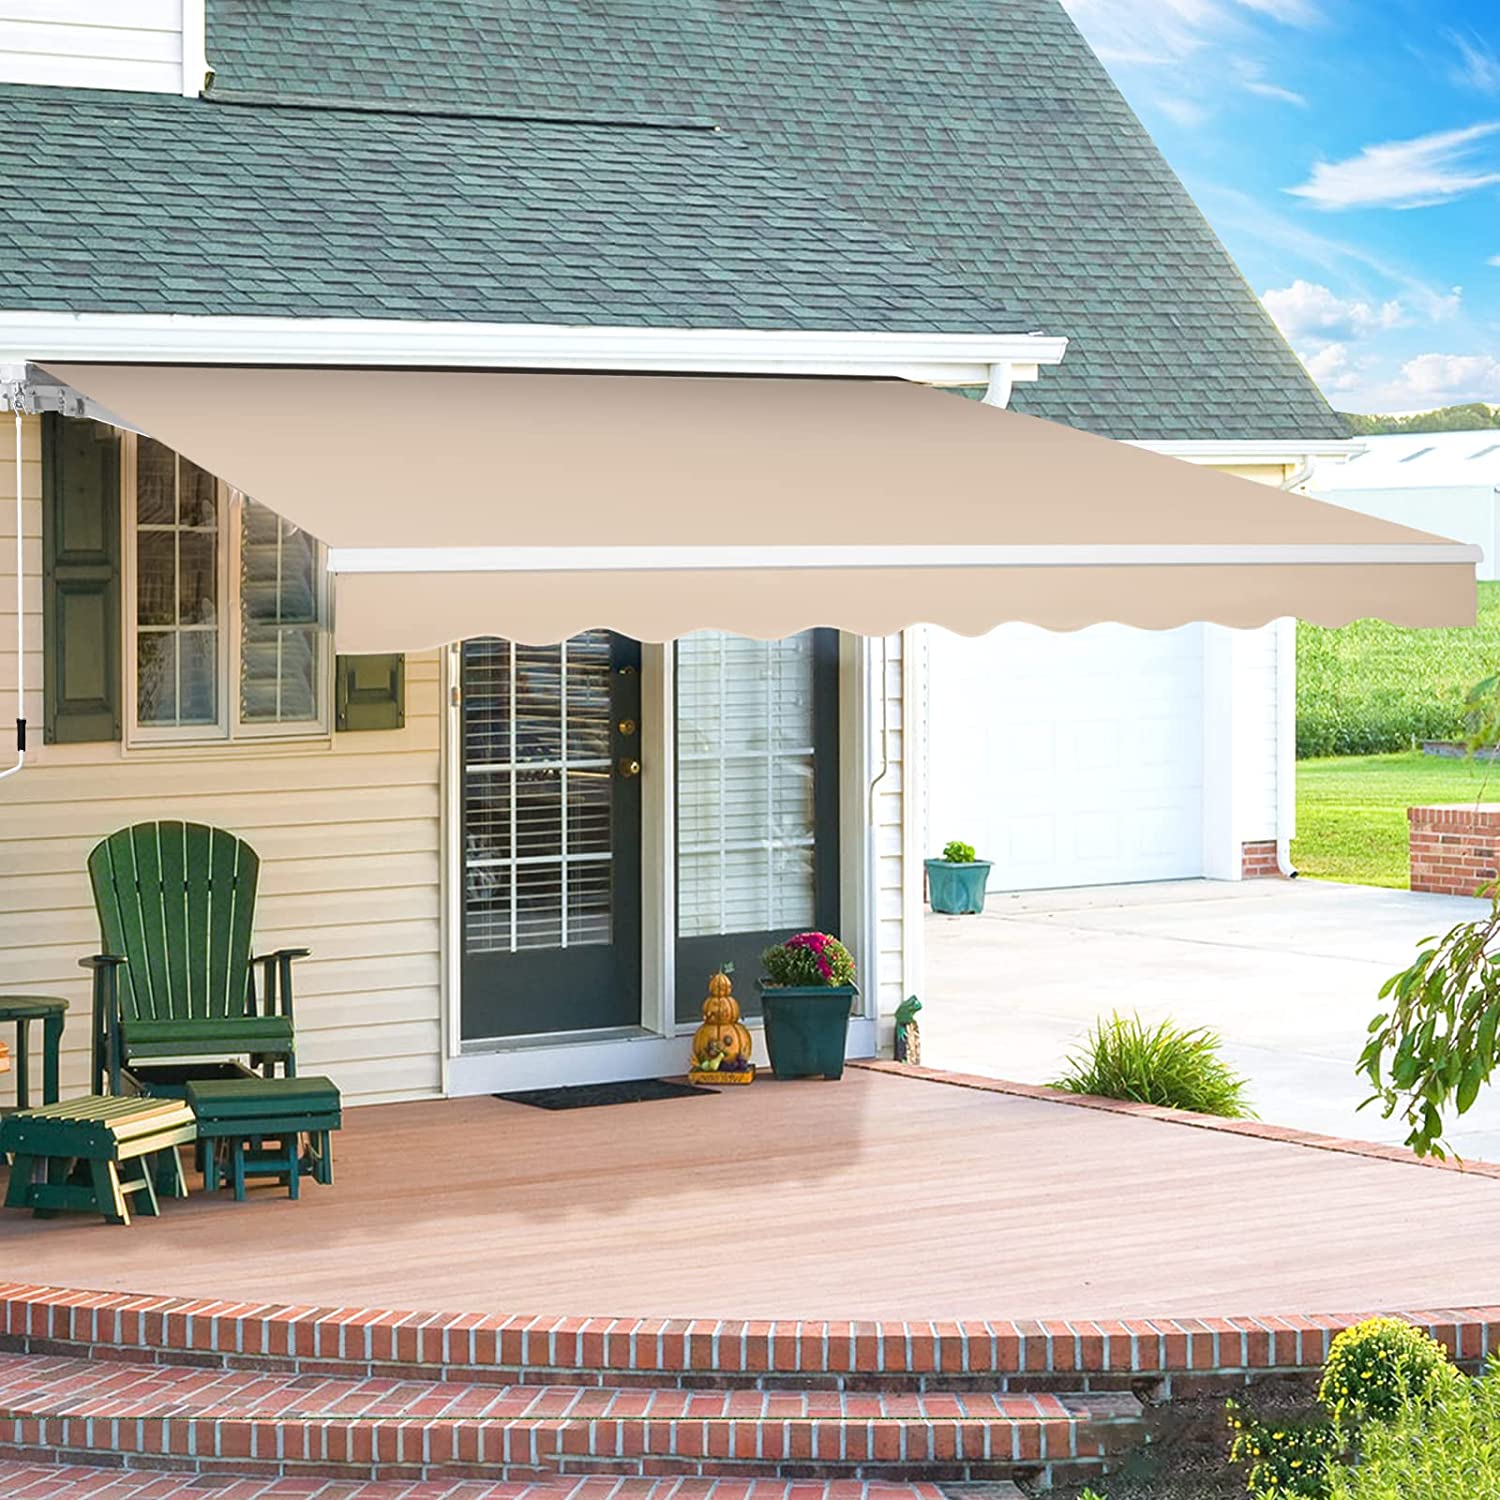 AECOJOY 8.2' x 6.5' Manual Retractable Patio Awning,Outdoor Awning Retractable Sunshade Shelter-Beige - image 1 of 6